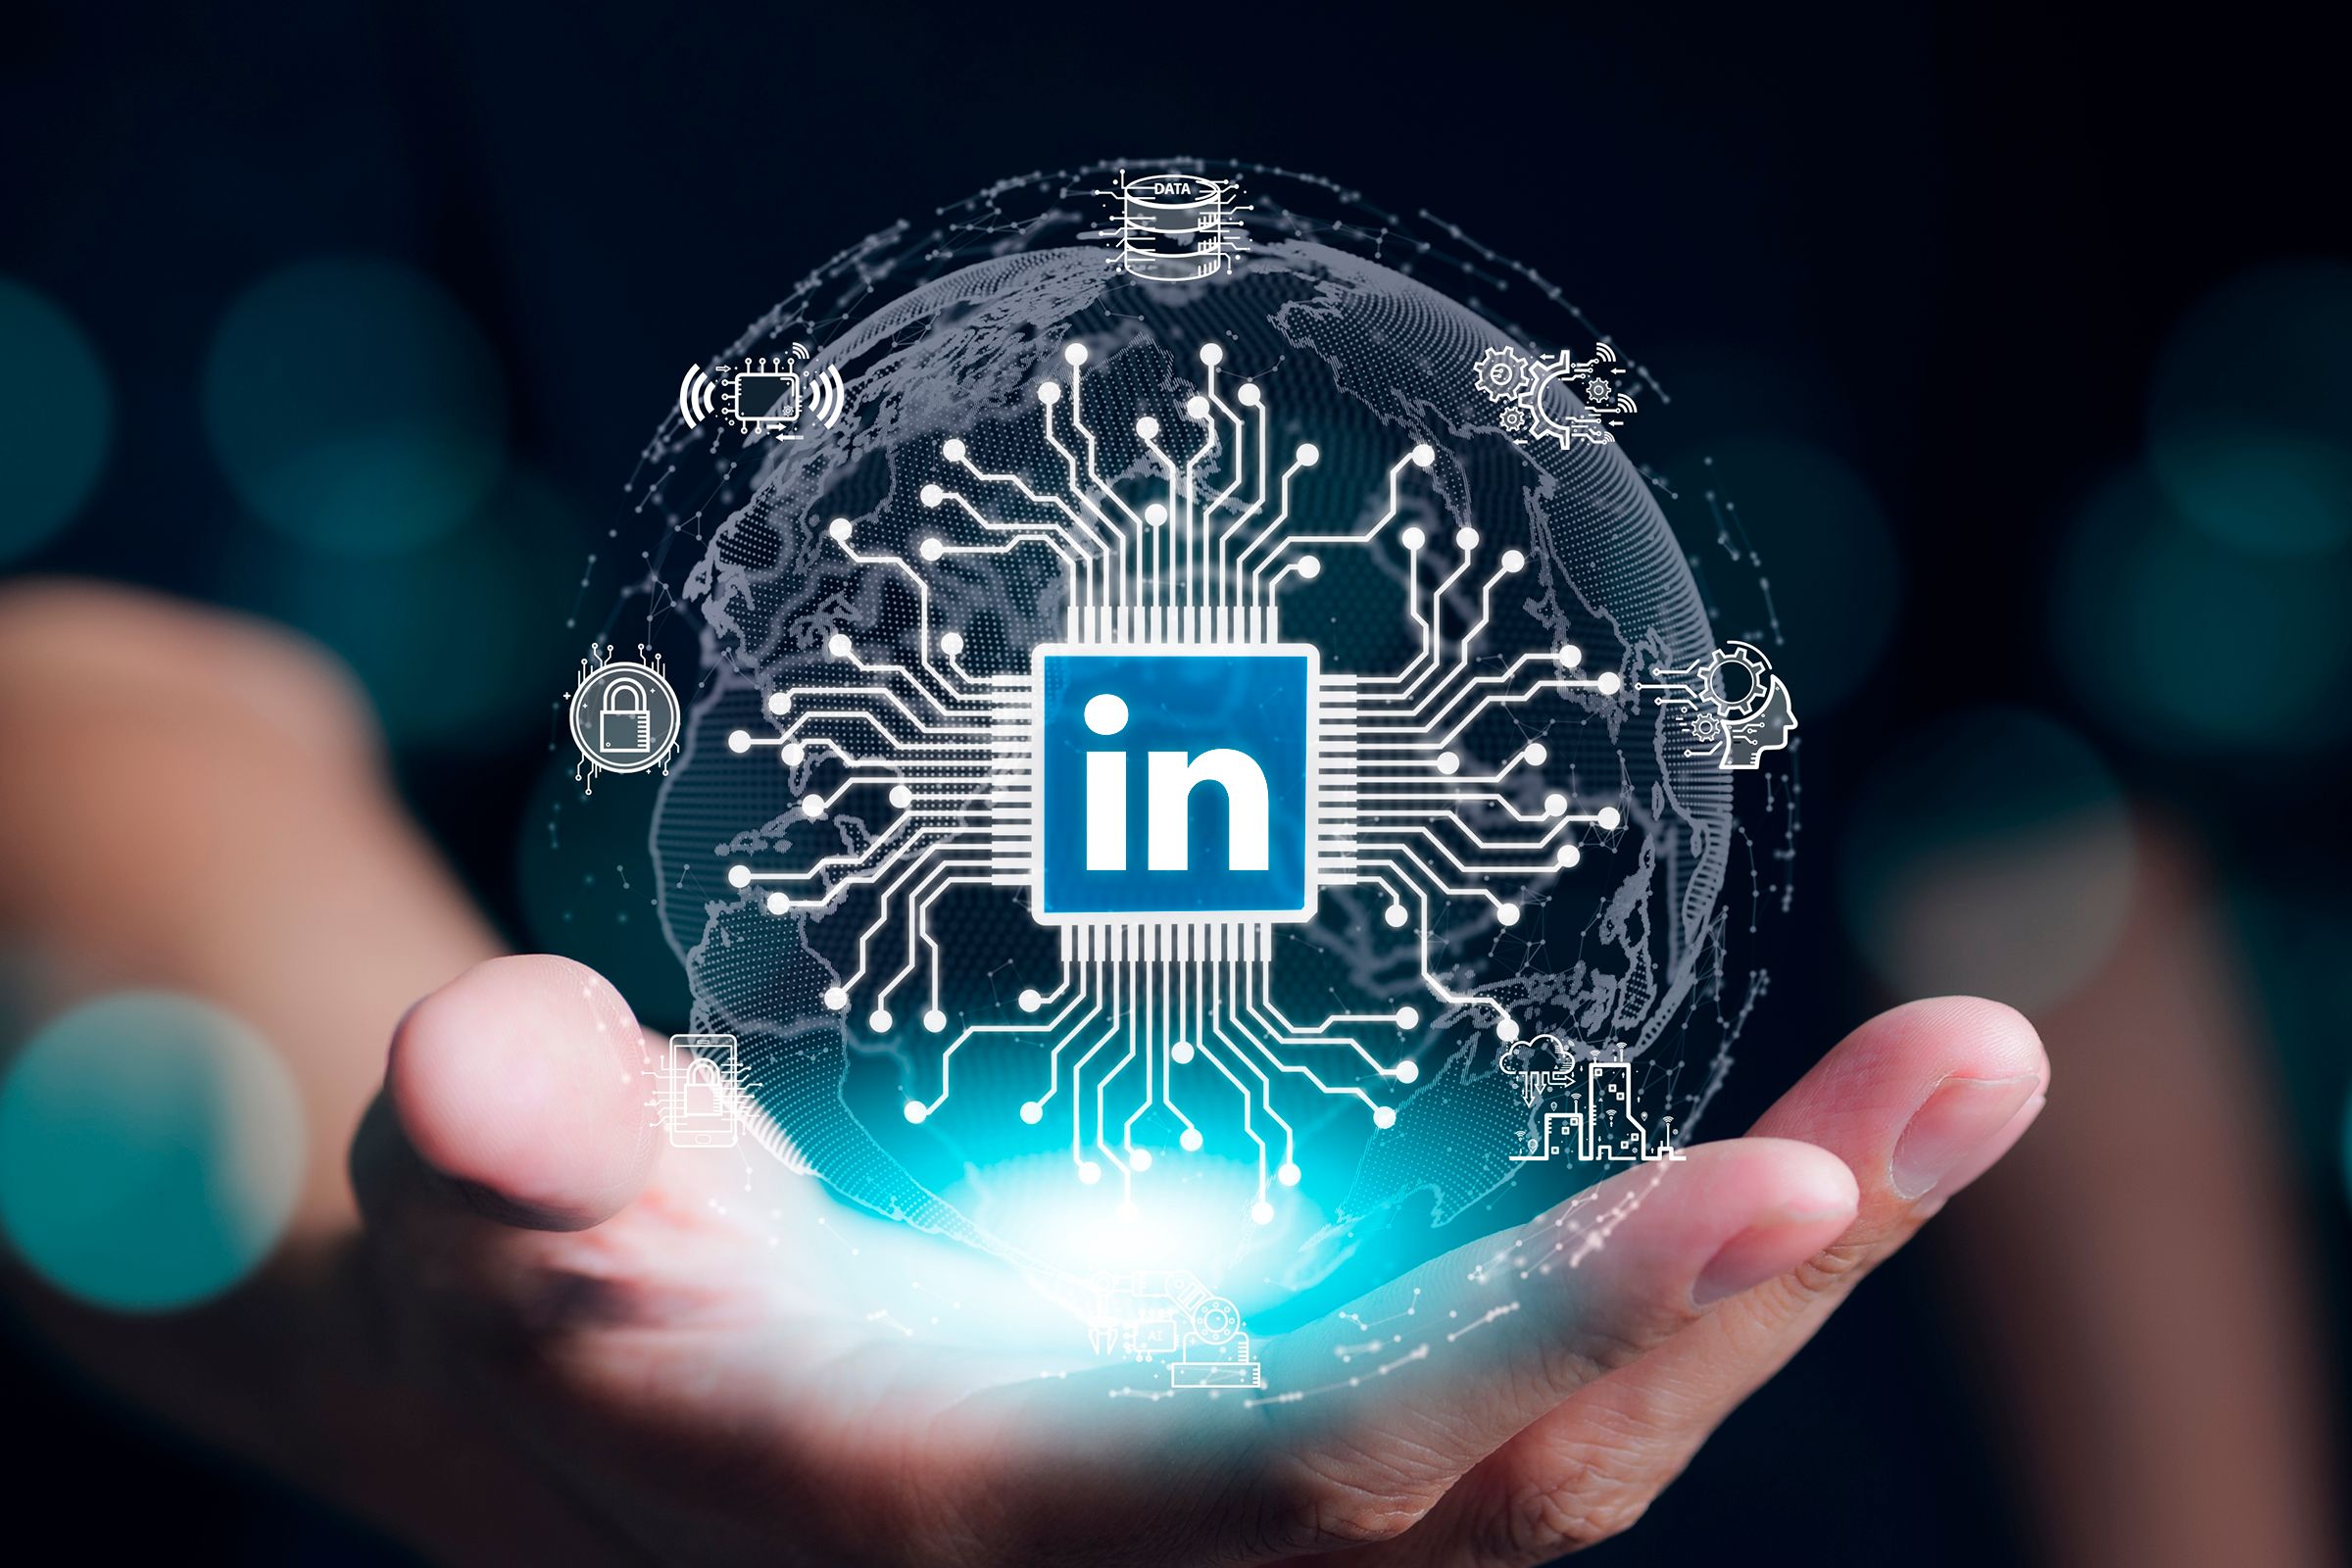 A hand with a hologram and some circuits illustrating artificial intelligence with the LinkedIn logo in the center.